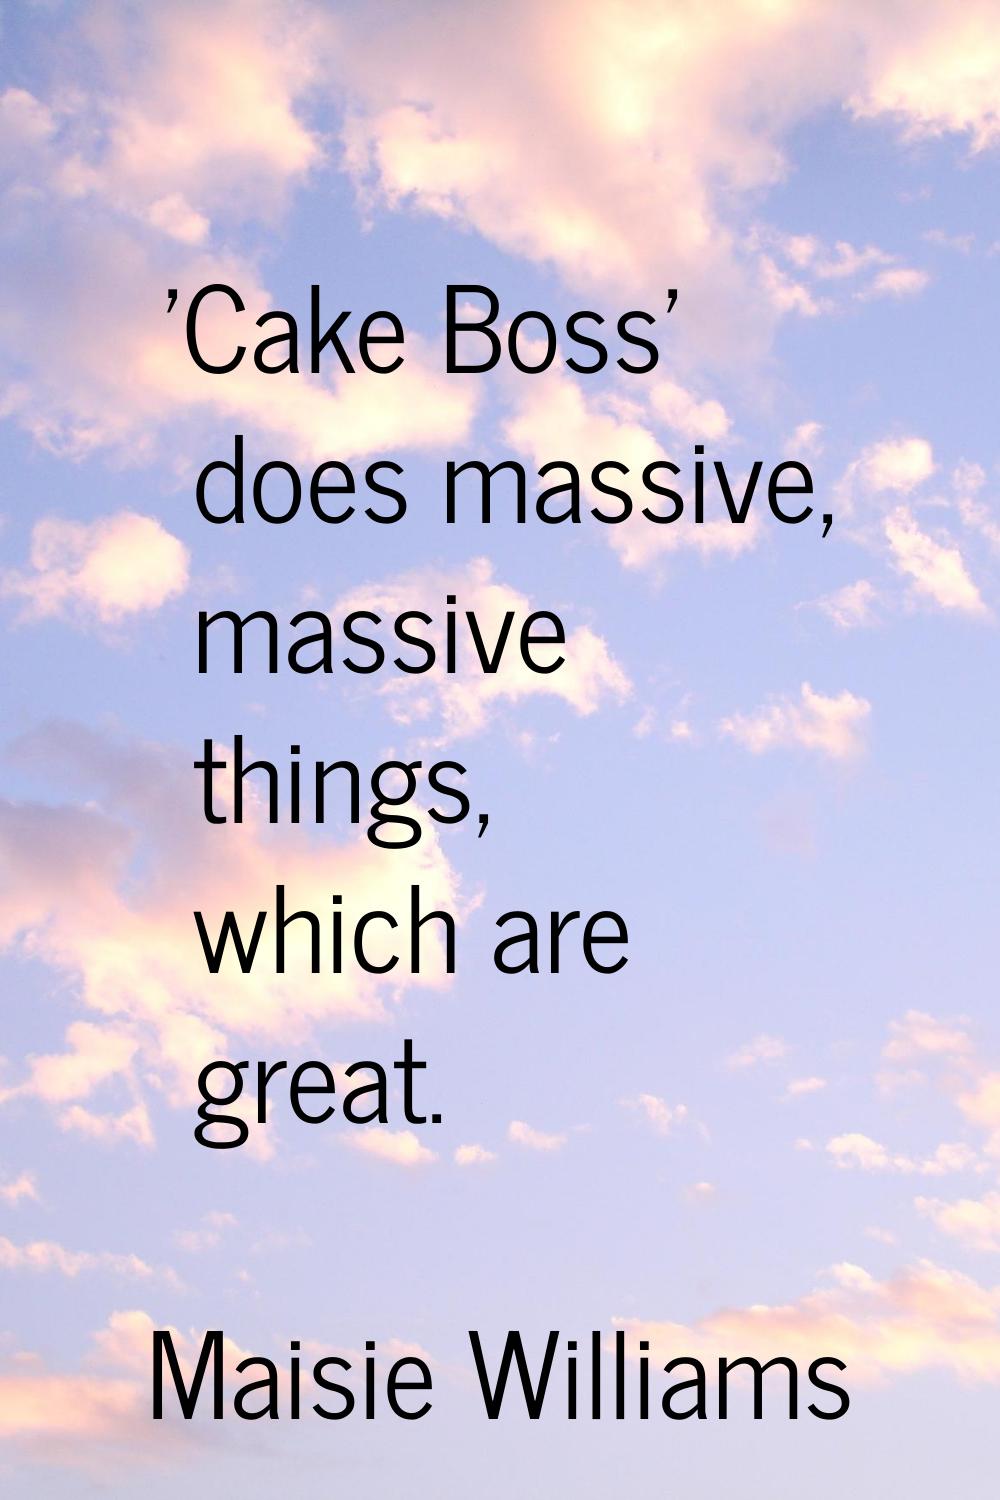 'Cake Boss' does massive, massive things, which are great.